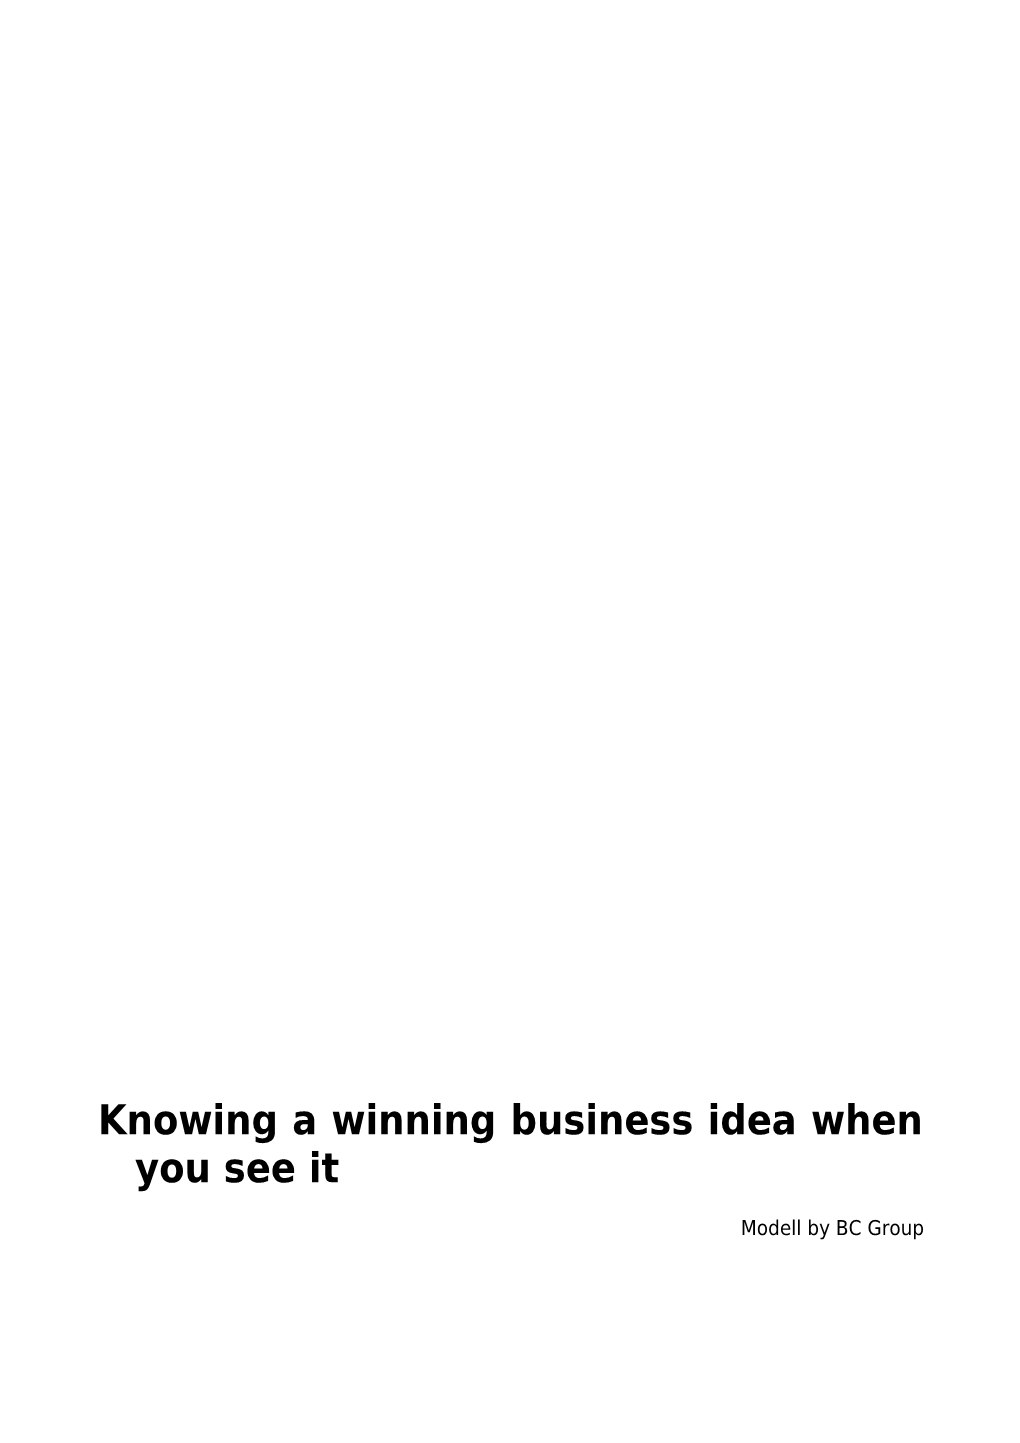 Knowing a Winning Business Idea When You See It